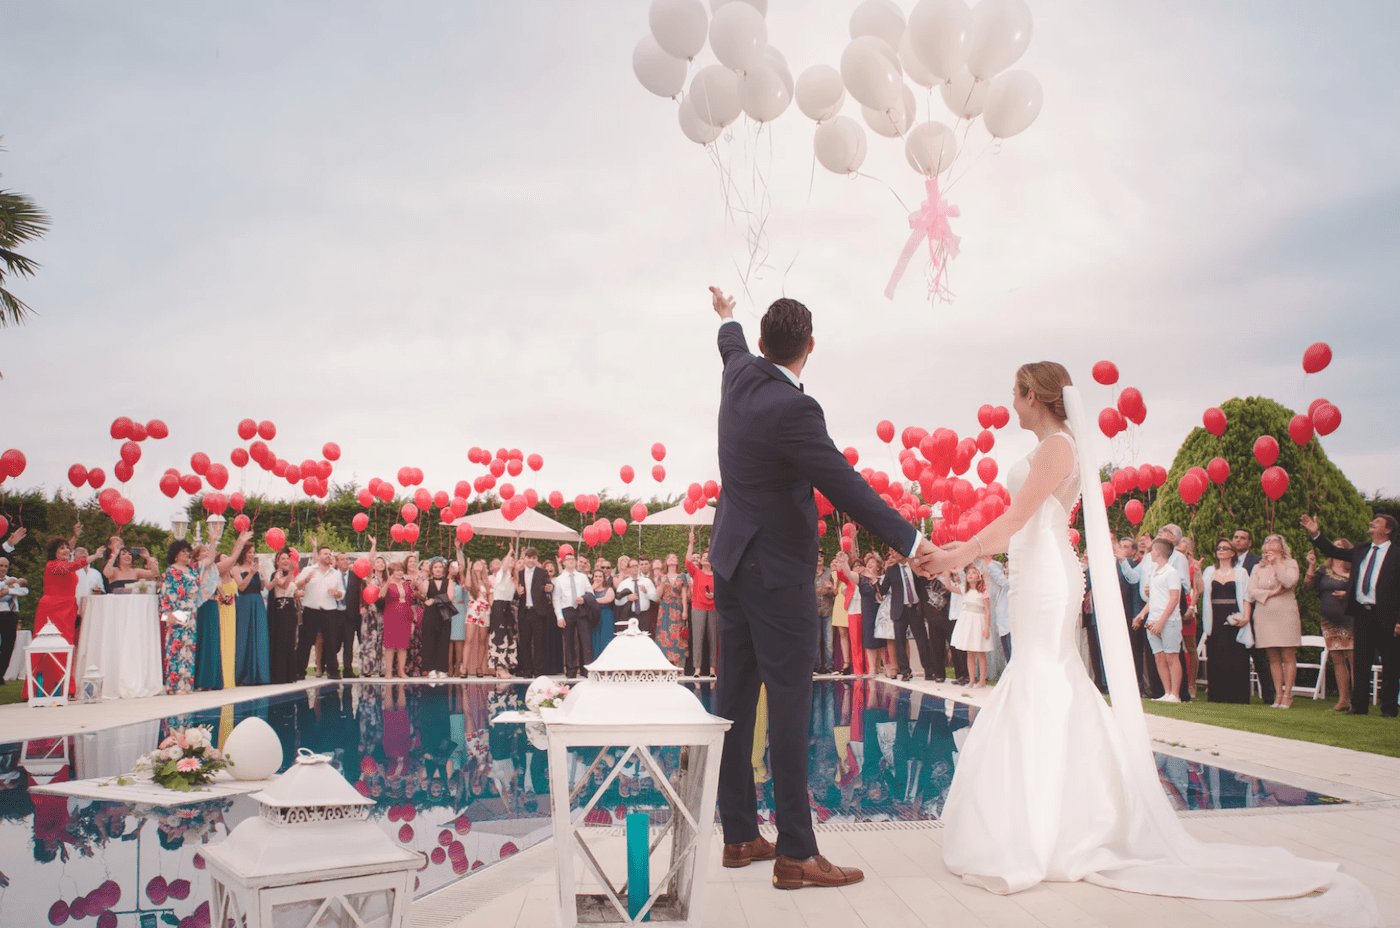 A bride and groom throwing balloons at their wedding